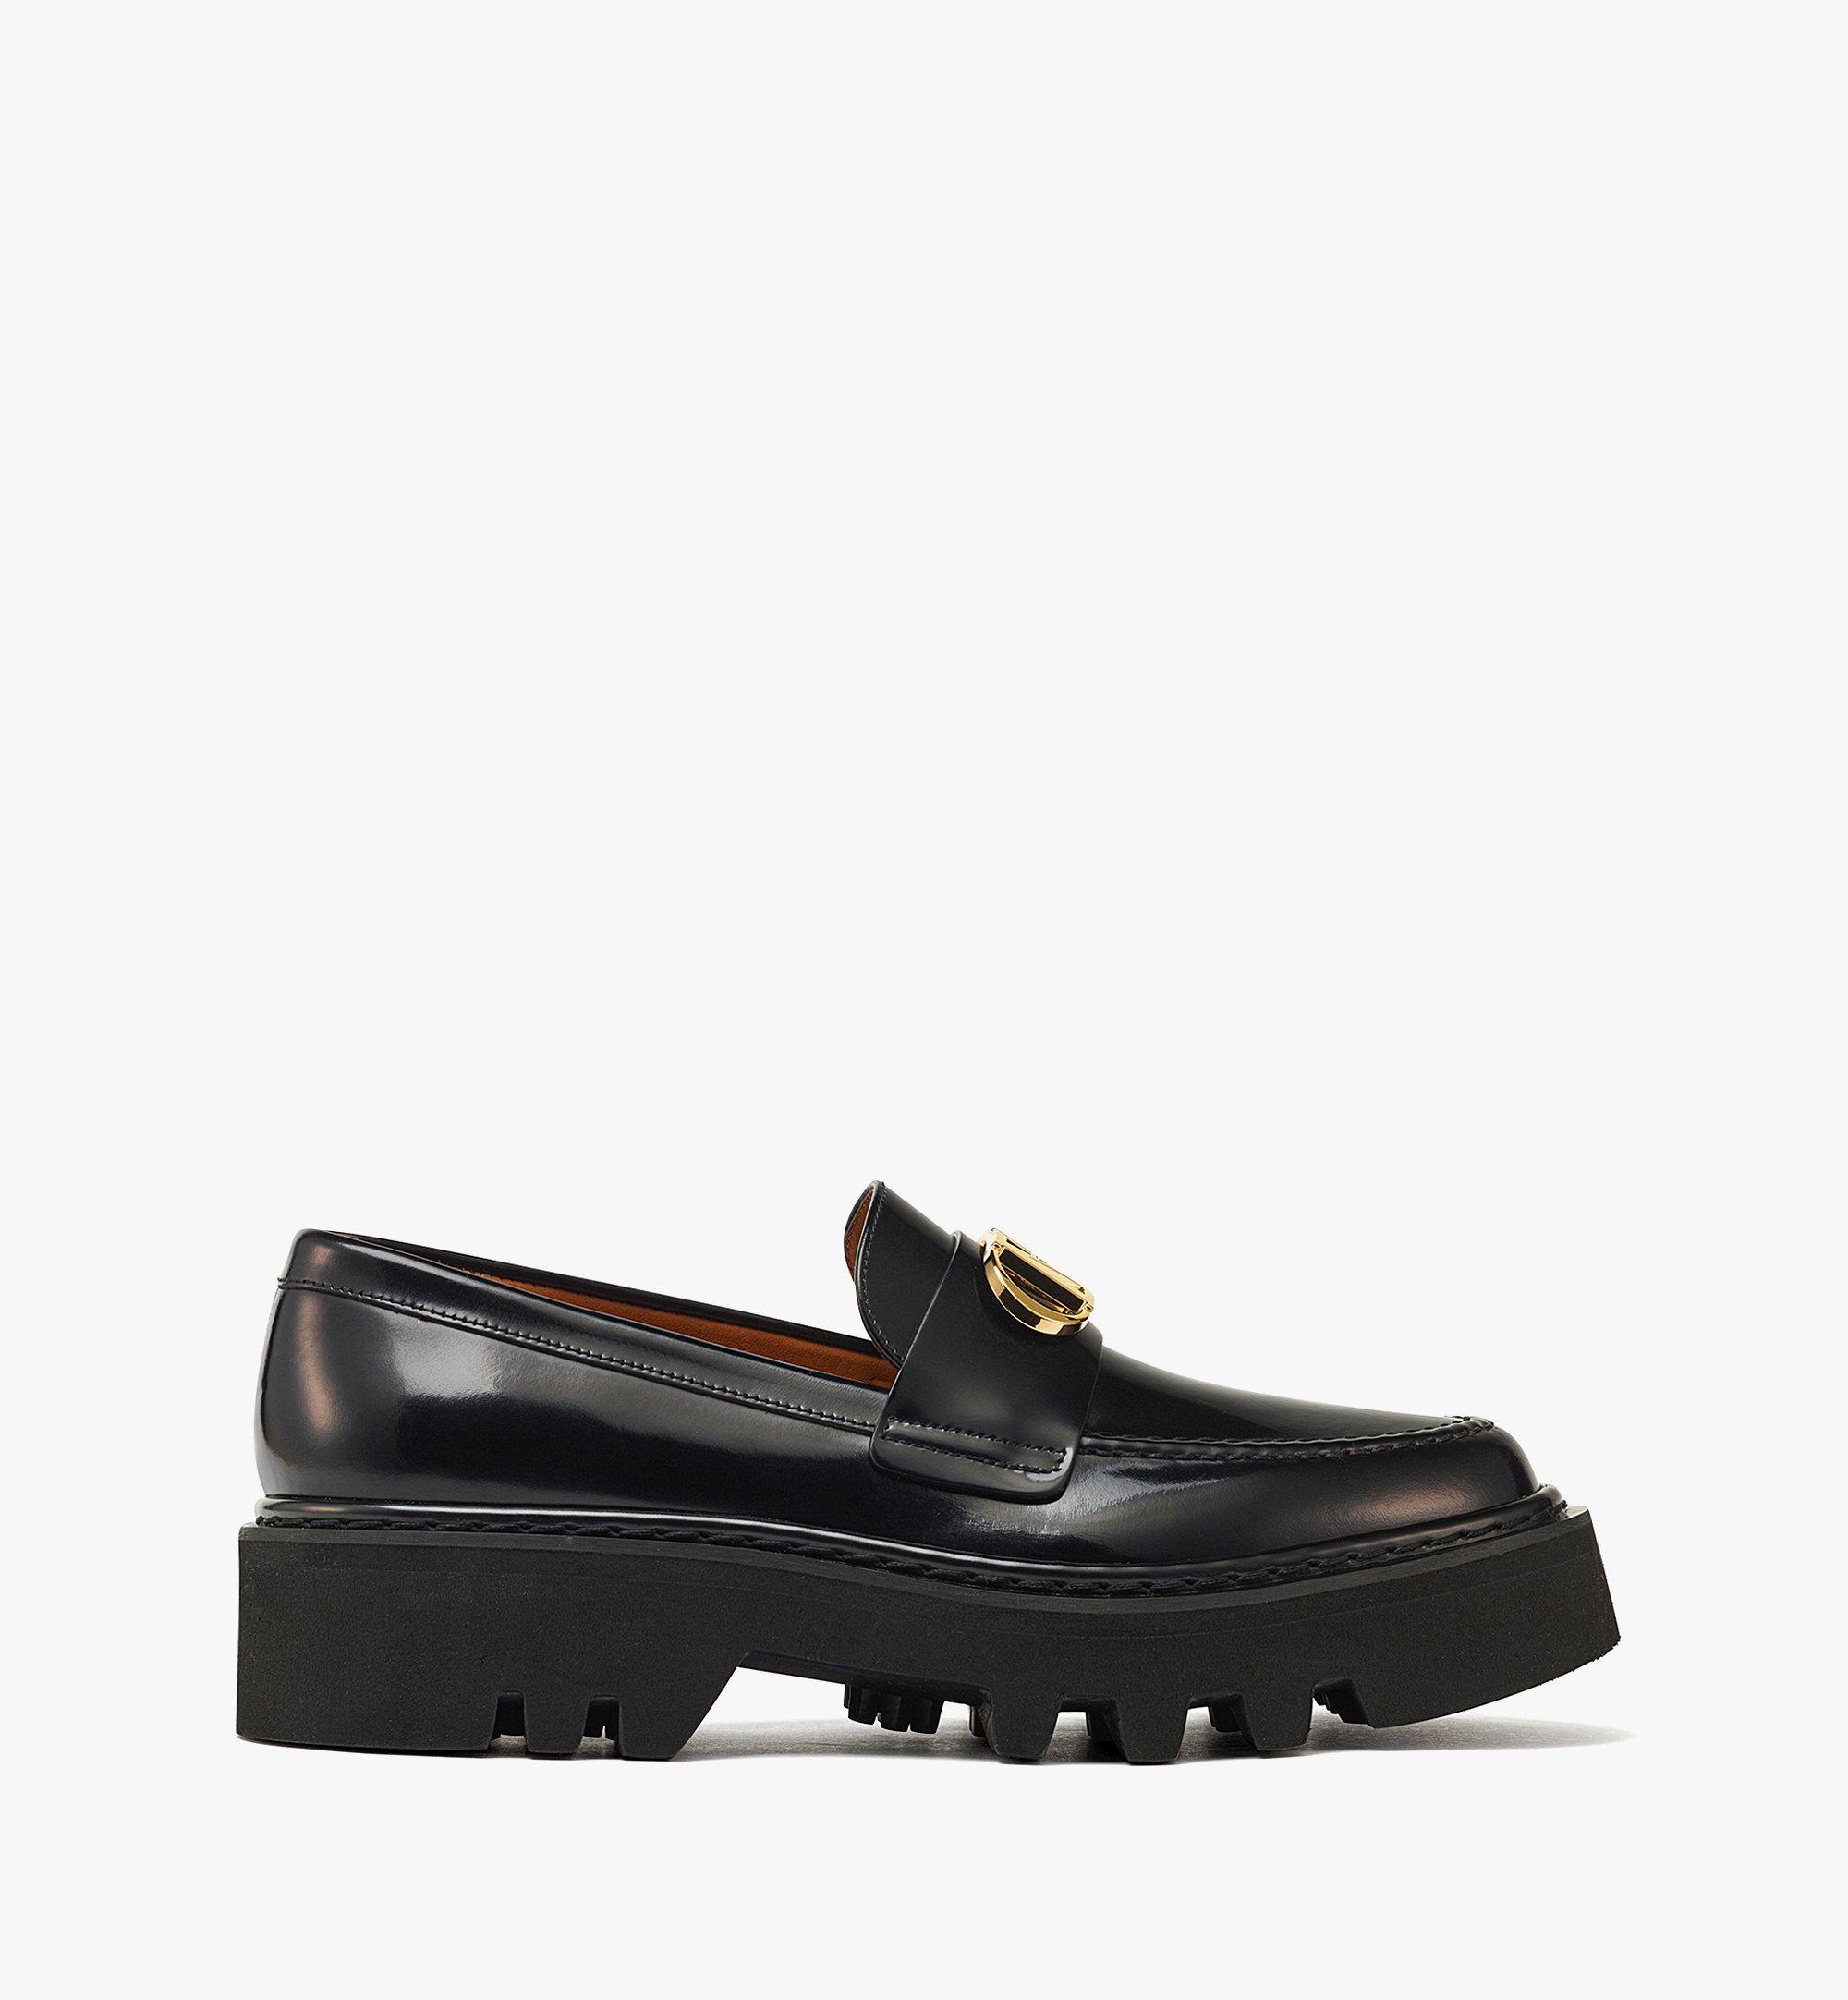 MCM Women’s Mode Travia Loafers in Brushed Calf Leather Black MESDSLD01BK039 Alternate View 3